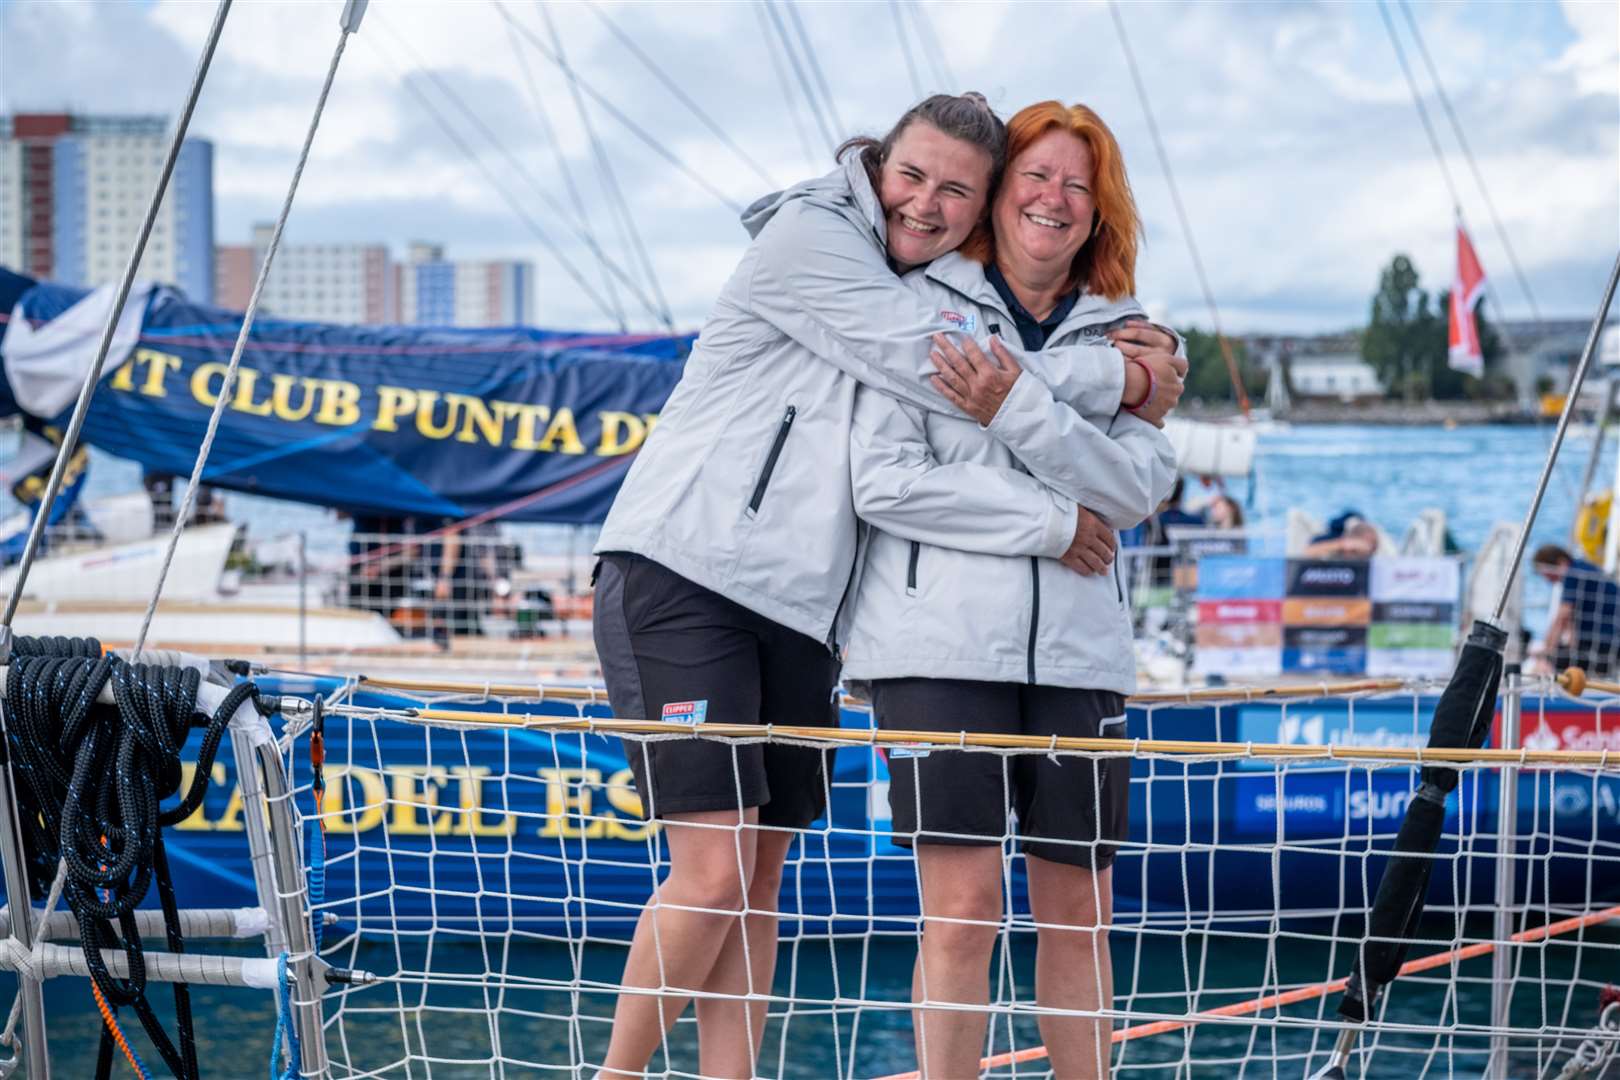 Amanda Shehab, 56, from Wrexham, will be competing with her daughter, Megan Allpress, 26, after her husband, who planned to sail around the world with her, died of cancer aged 51 (Jason Bye/PA)